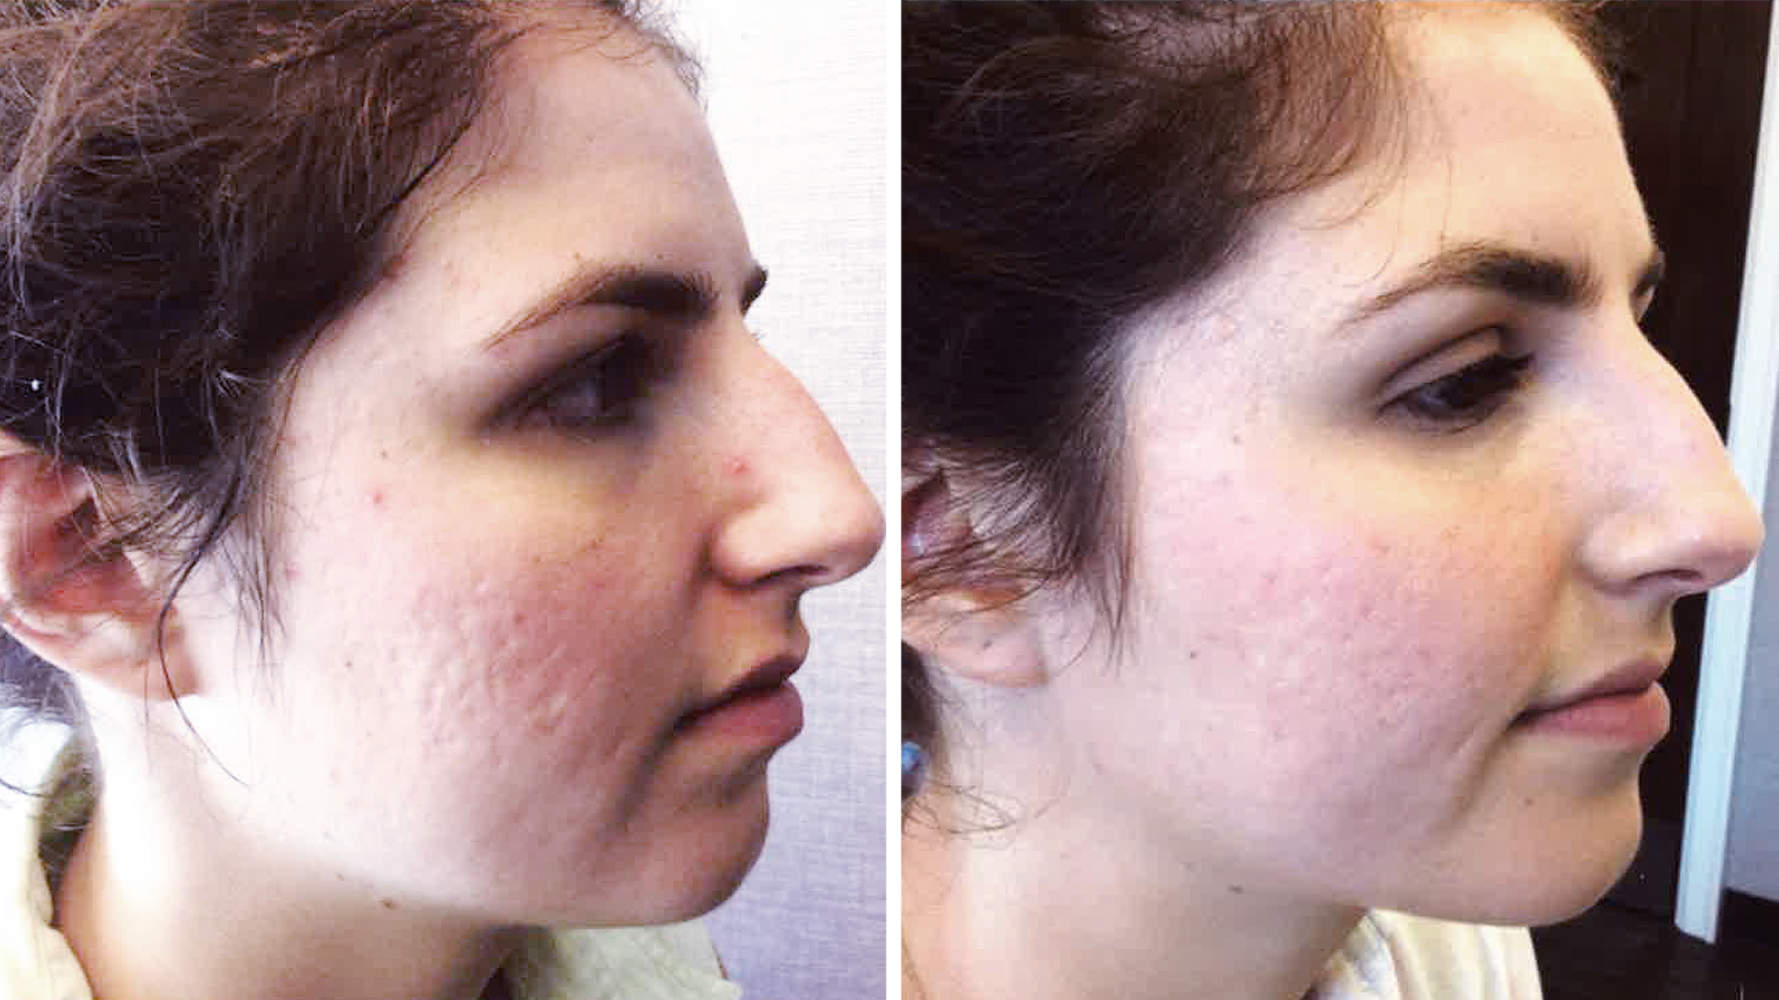 Sherry recommendet facial blemishes and scars Diminishing